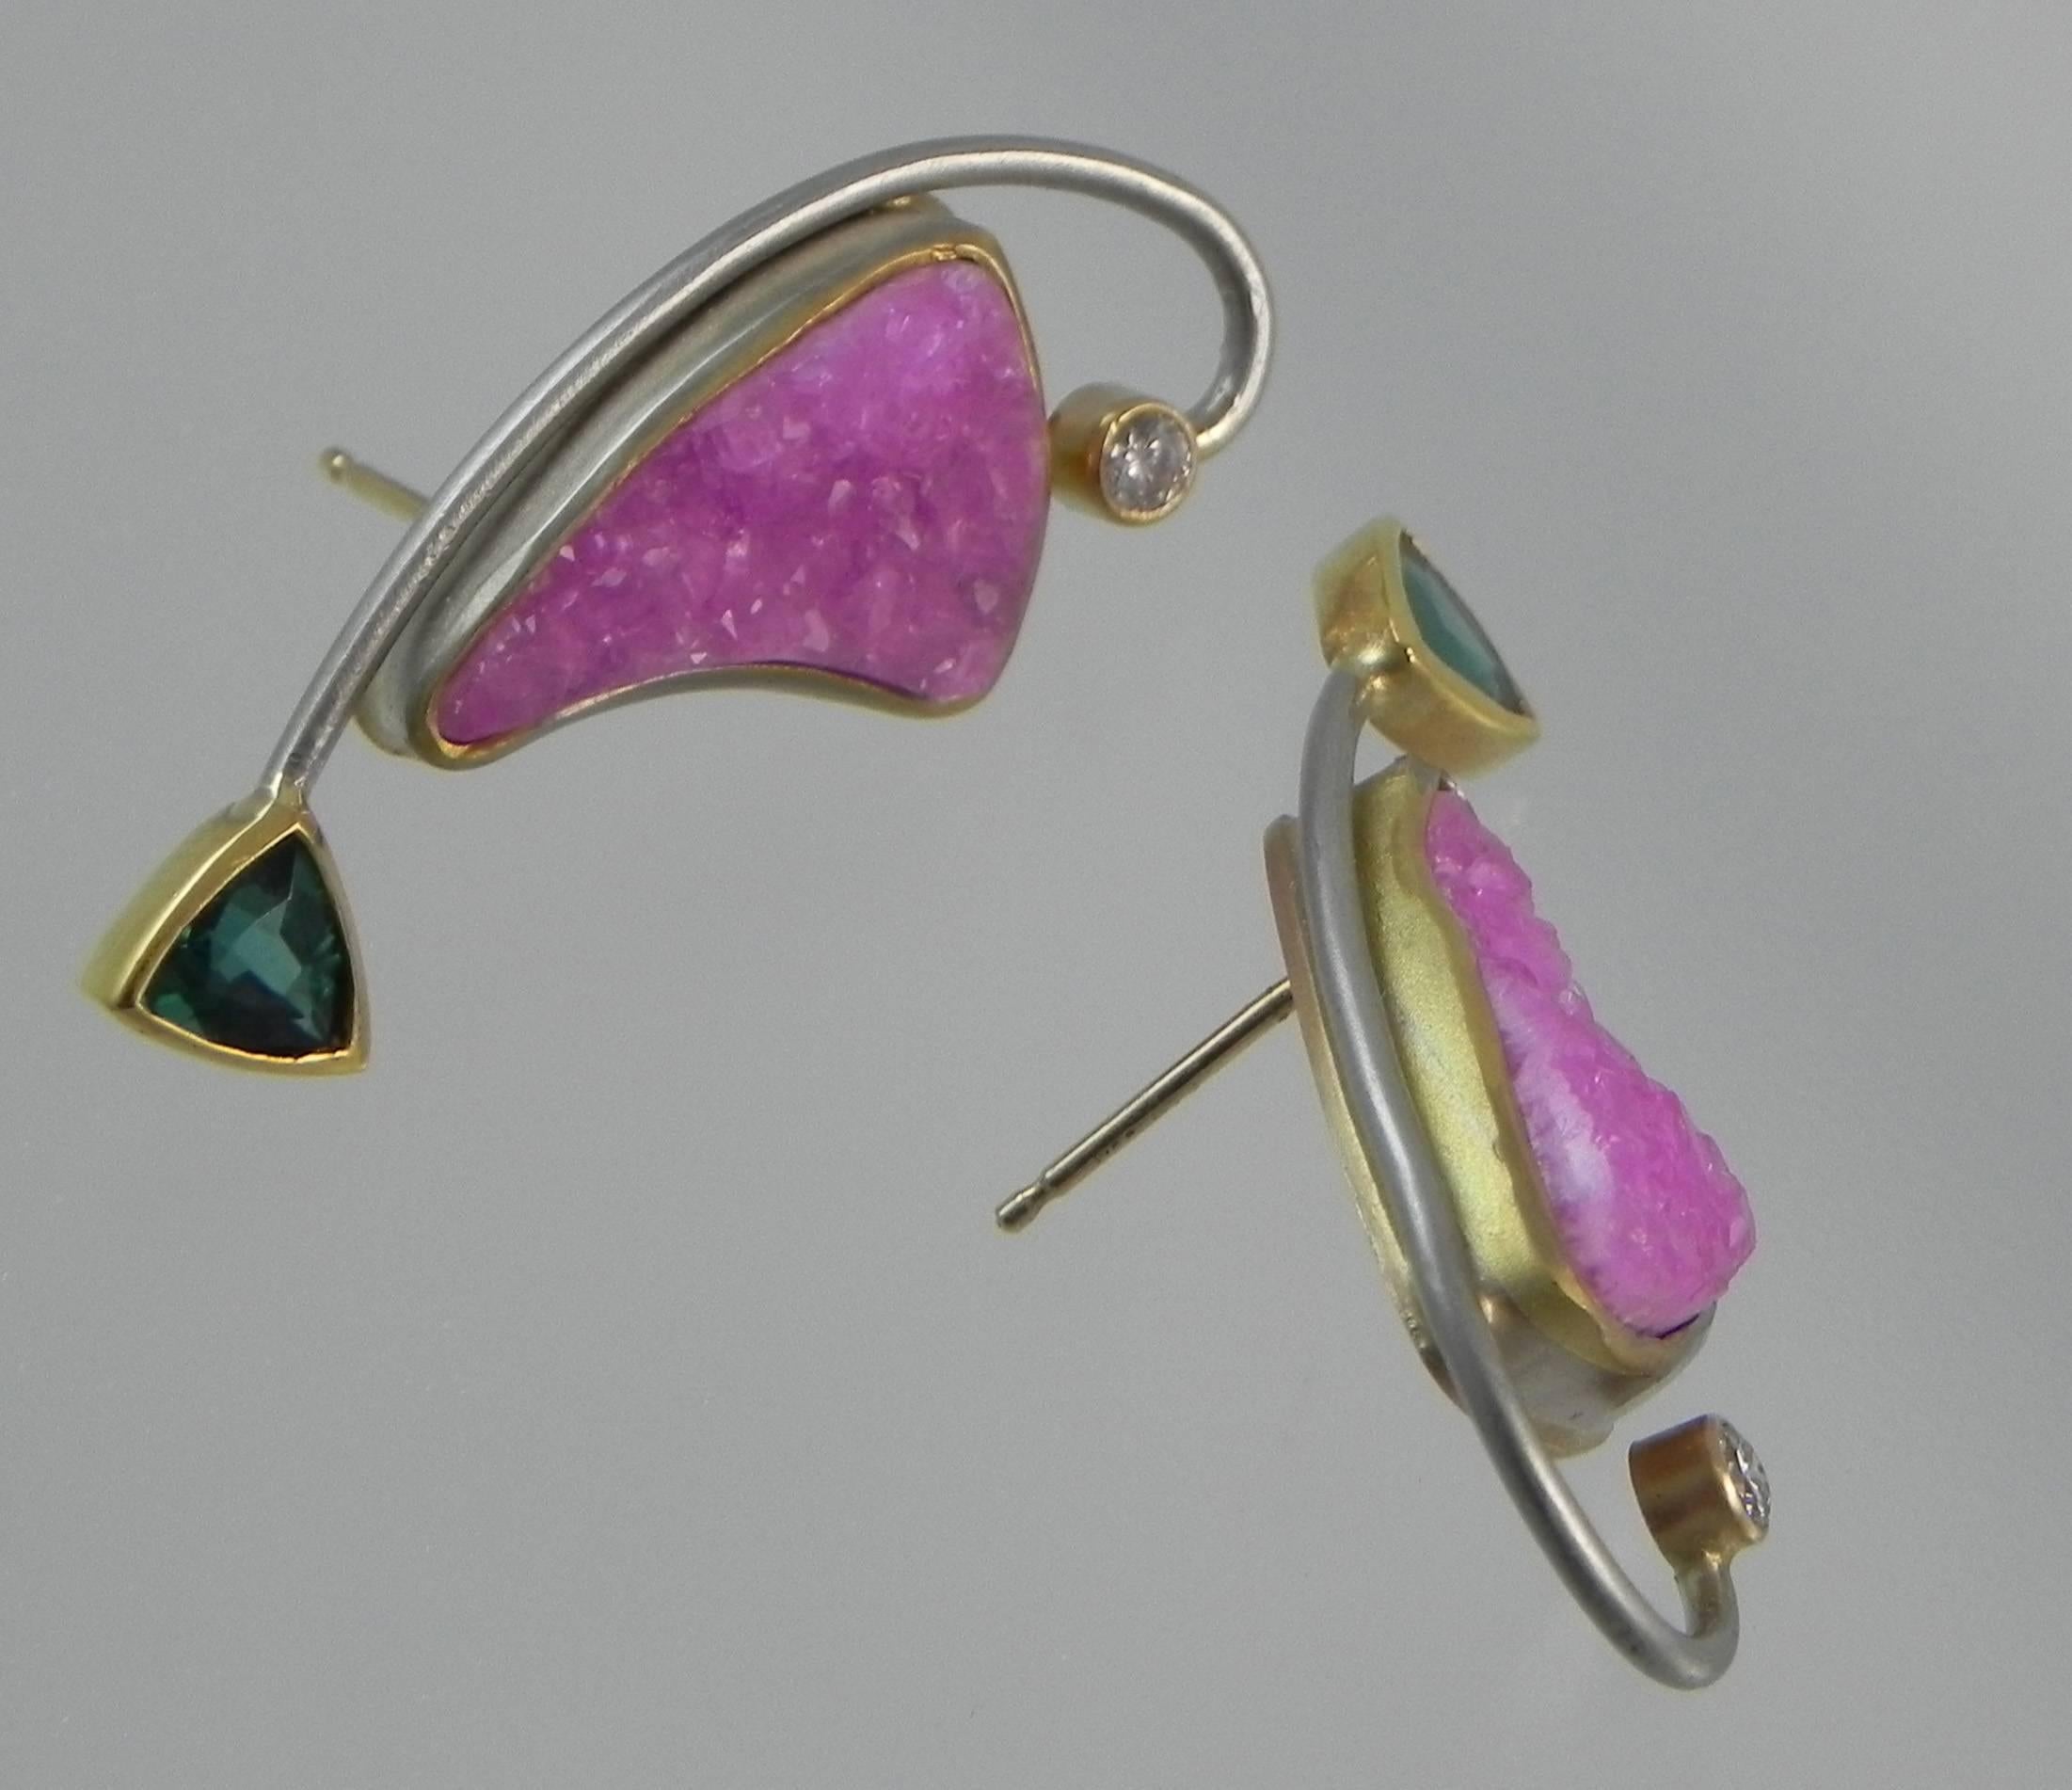 One of a kind and handmade earrings by Colorado’s Premier Jewelry Design Studio and Master Craftsman – Steven M. Parks.  The designer chose these stunning pink druzy calcite stones because of their unusual shape and amazingly intense pink color, he